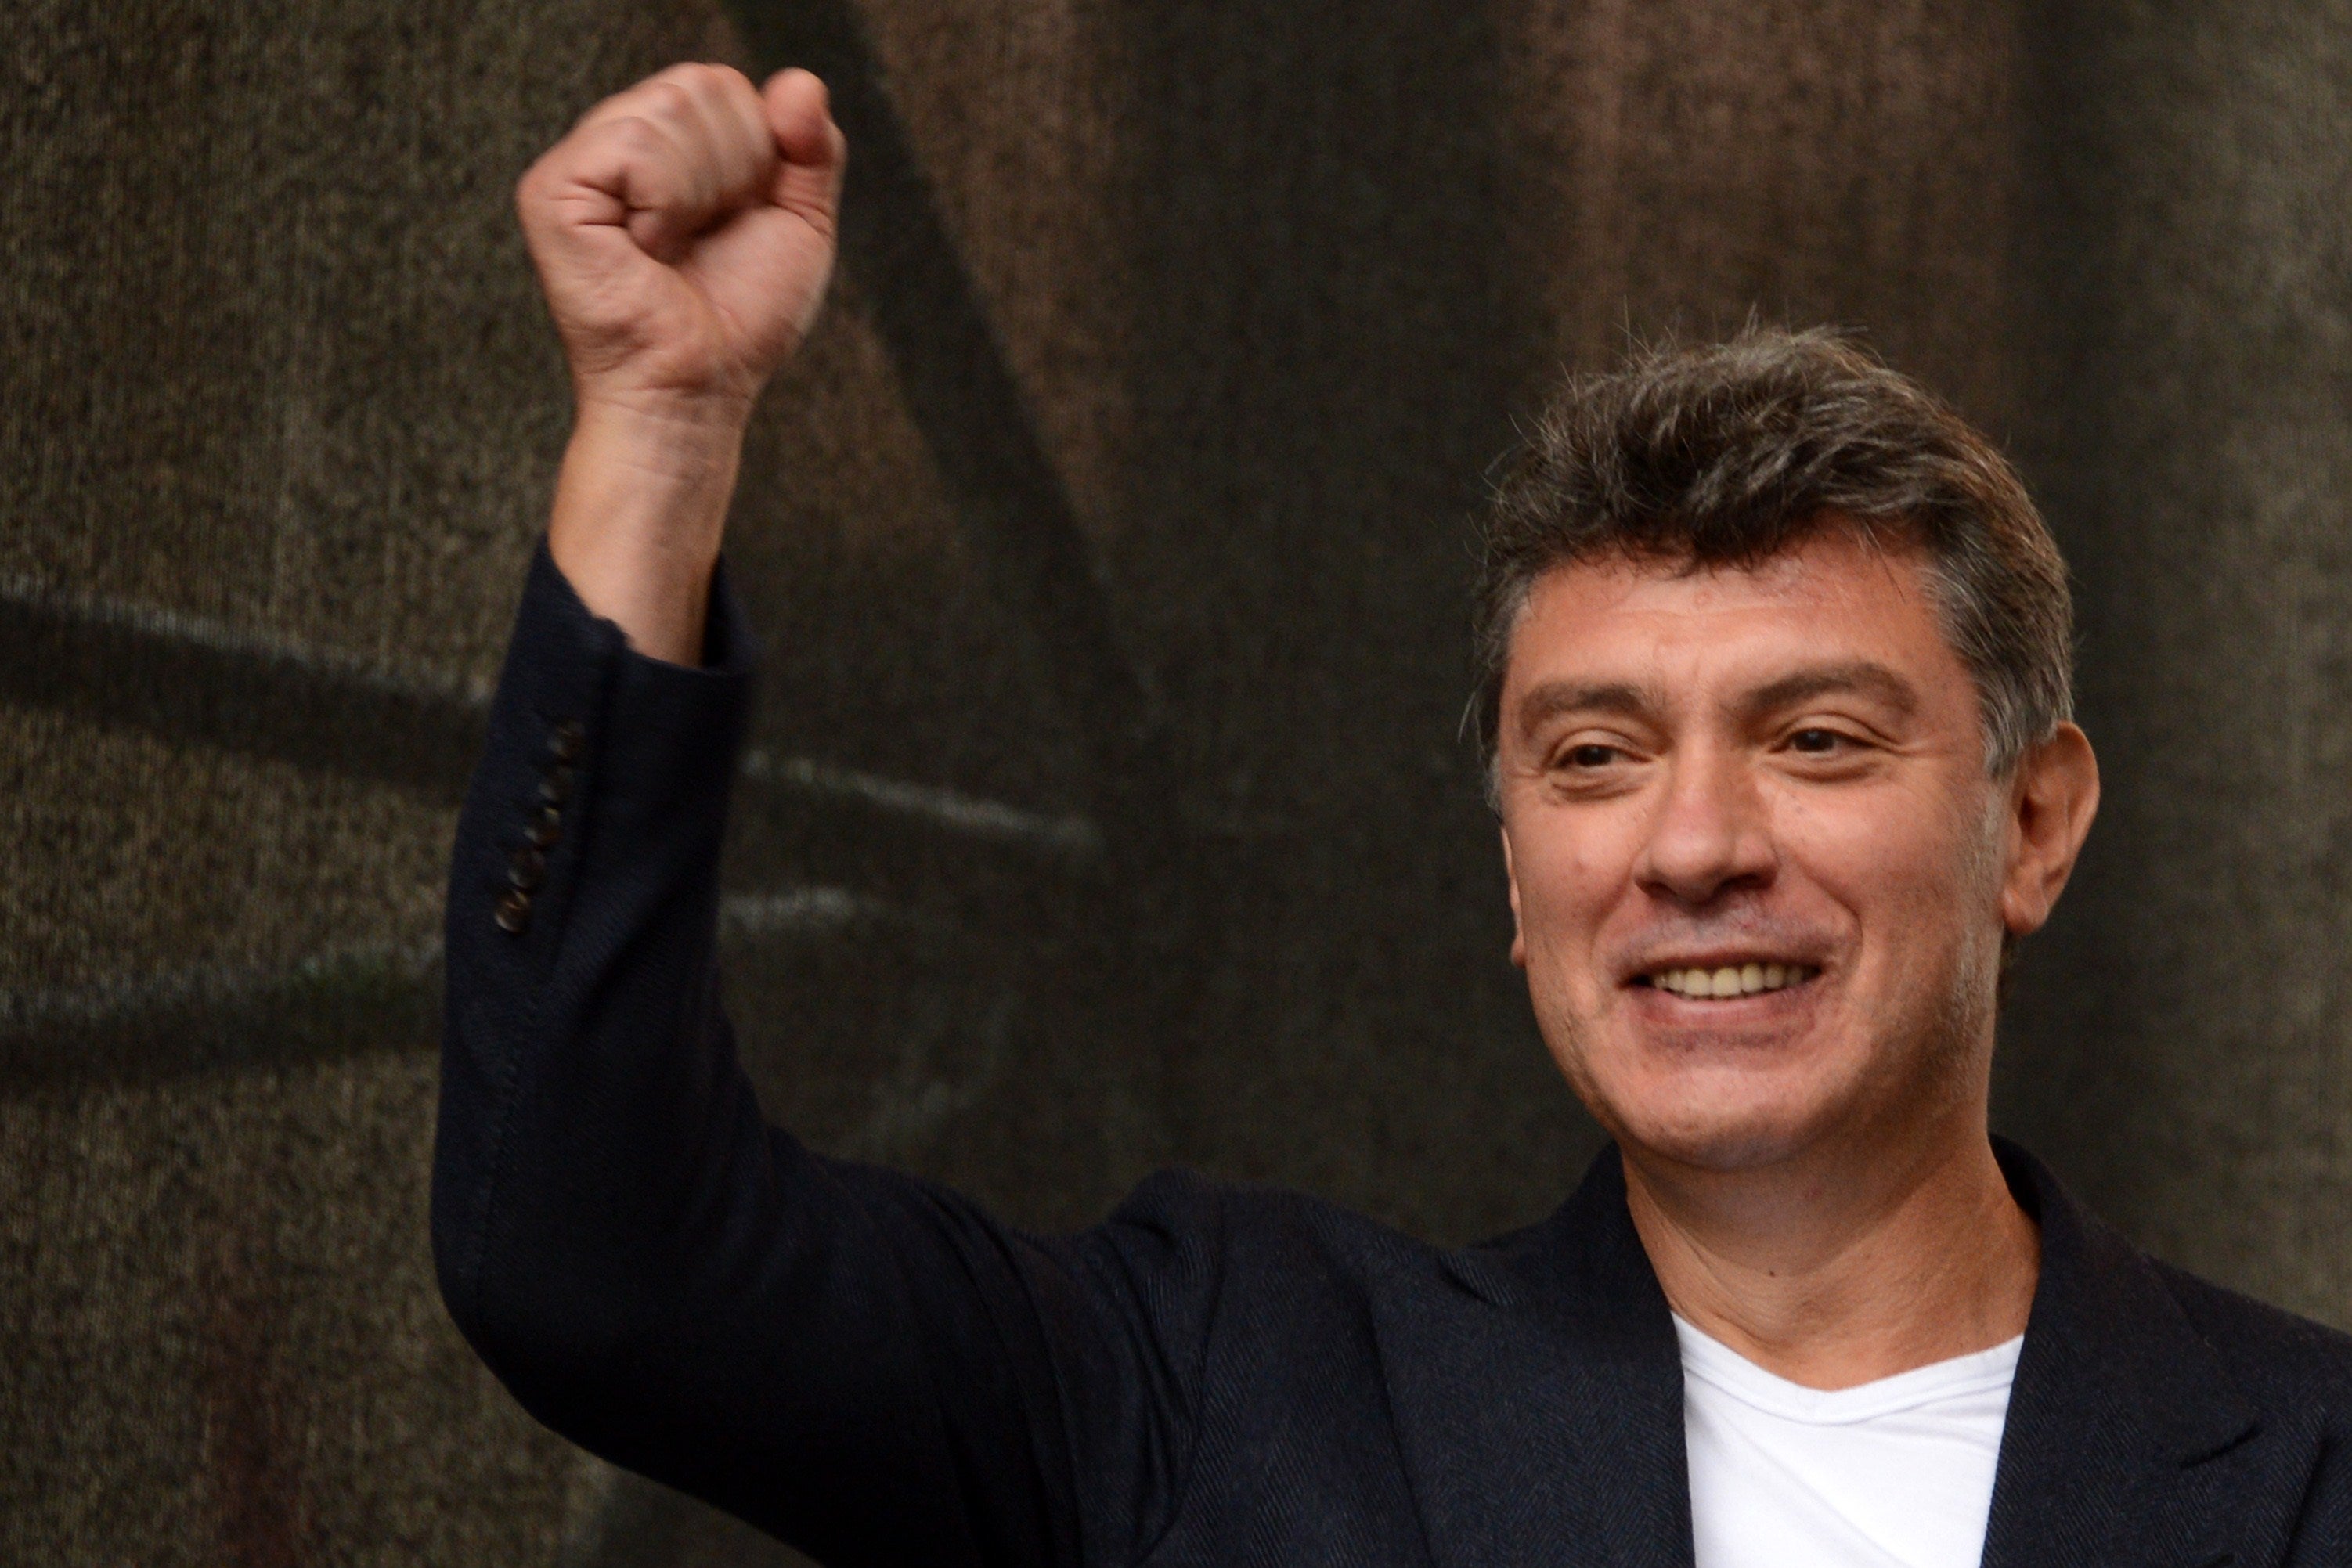 Former first deputy prime minister Boris Nemtsov, who was killed at the age of 55, gestures during an anti-Putin protest in central Moscow, on September 15, 2012